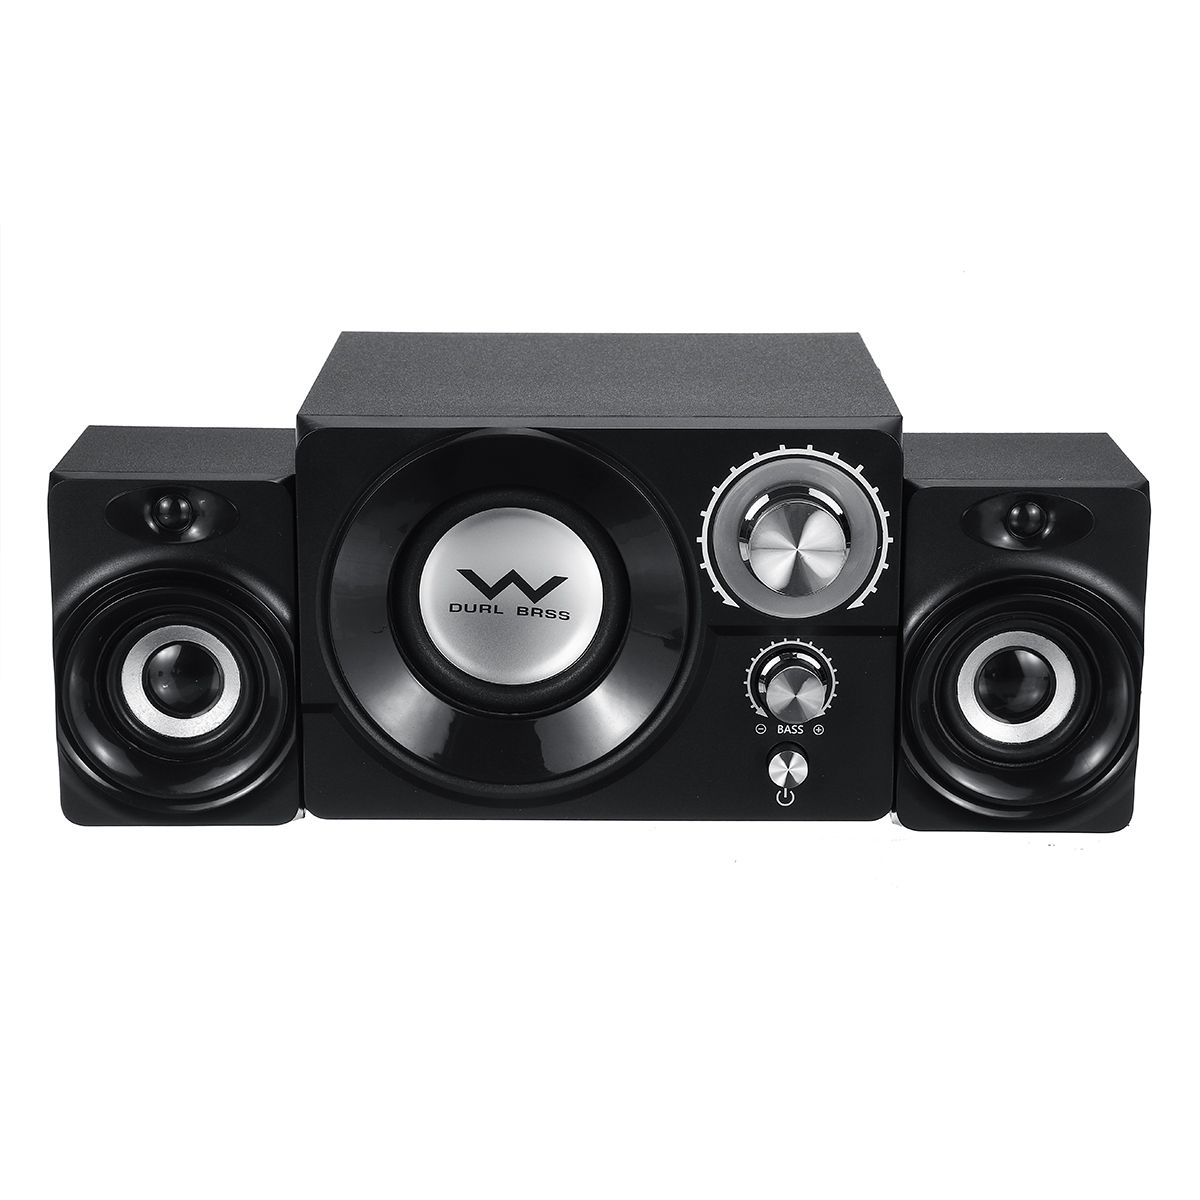 SADA-S-20-11W-Subwoofer-Wooden-Speaker-for-Computer-for-Home-Theater-1629977